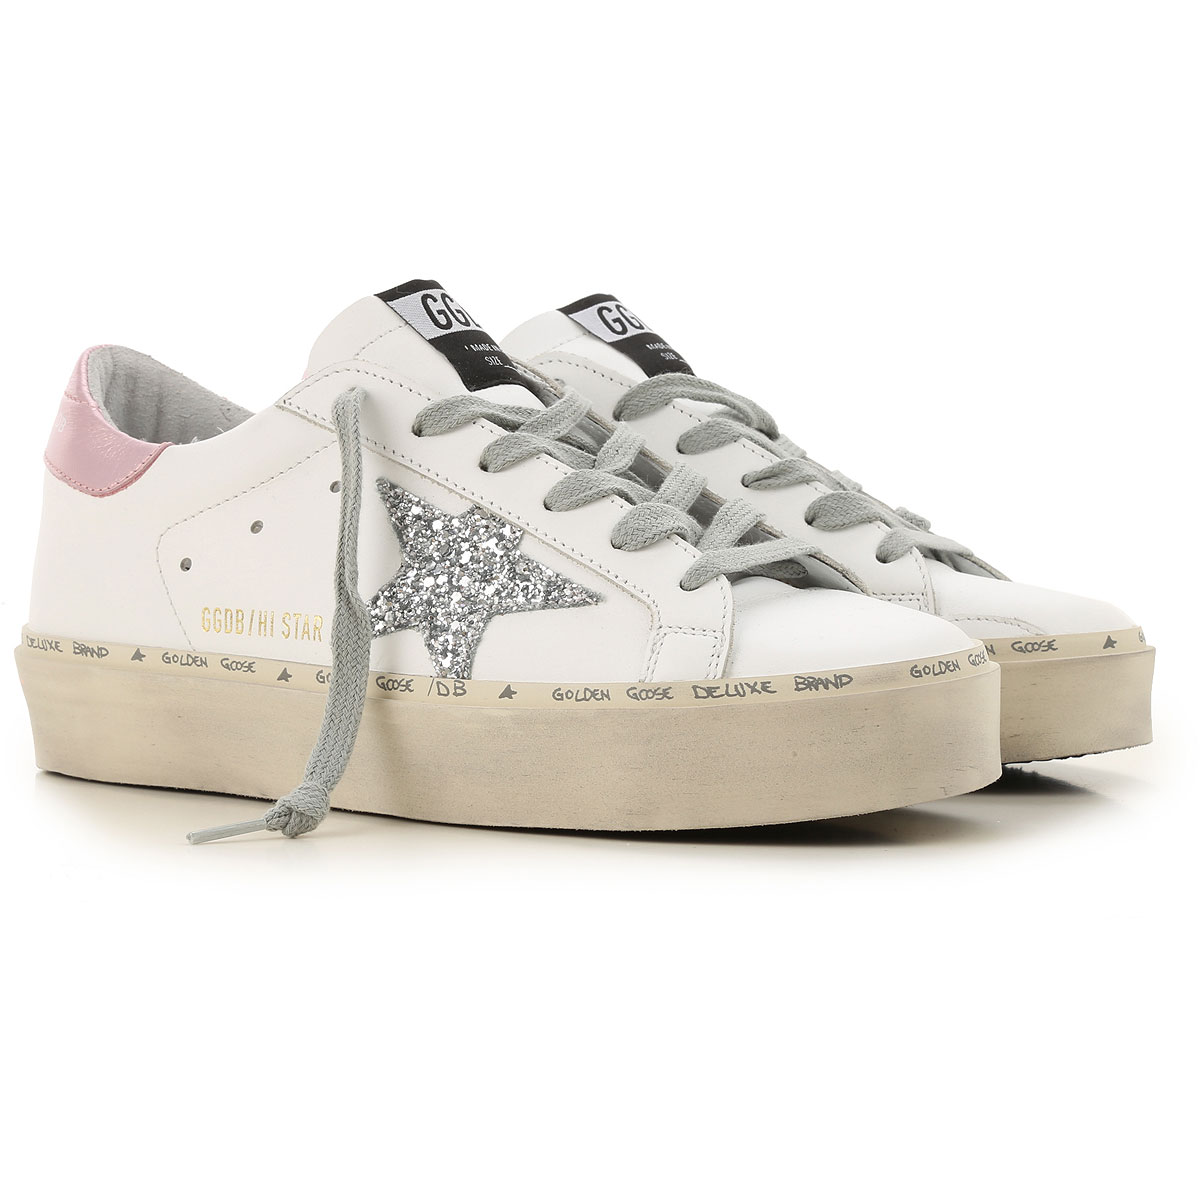 Womens Shoes Golden Goose, Style code: g35ws945-g9-